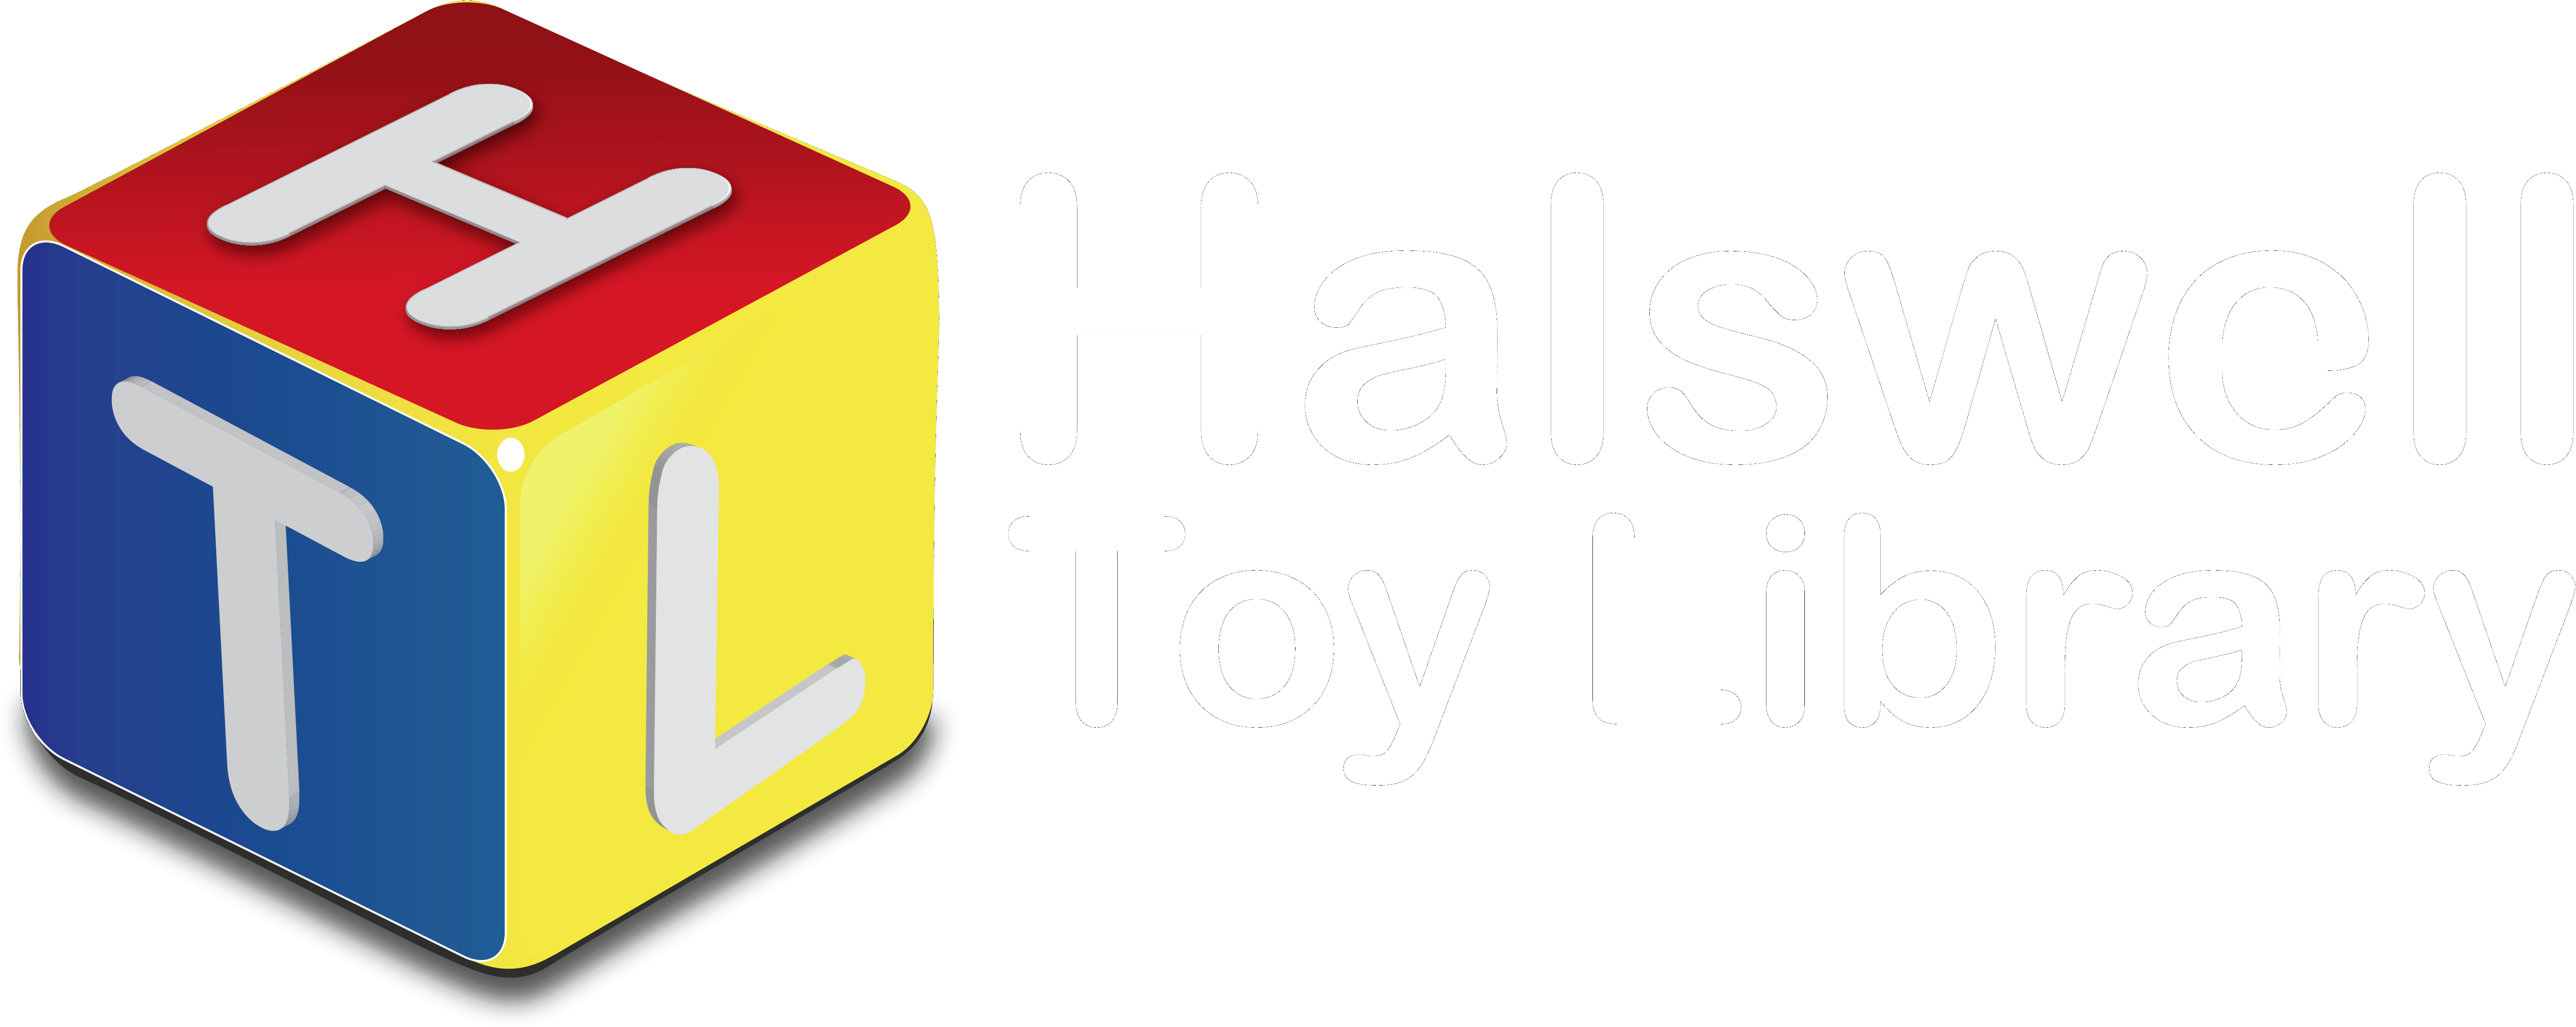 The Halswell Toy Library Inc Is A Non-profit Community - Halswell (6000x2185)